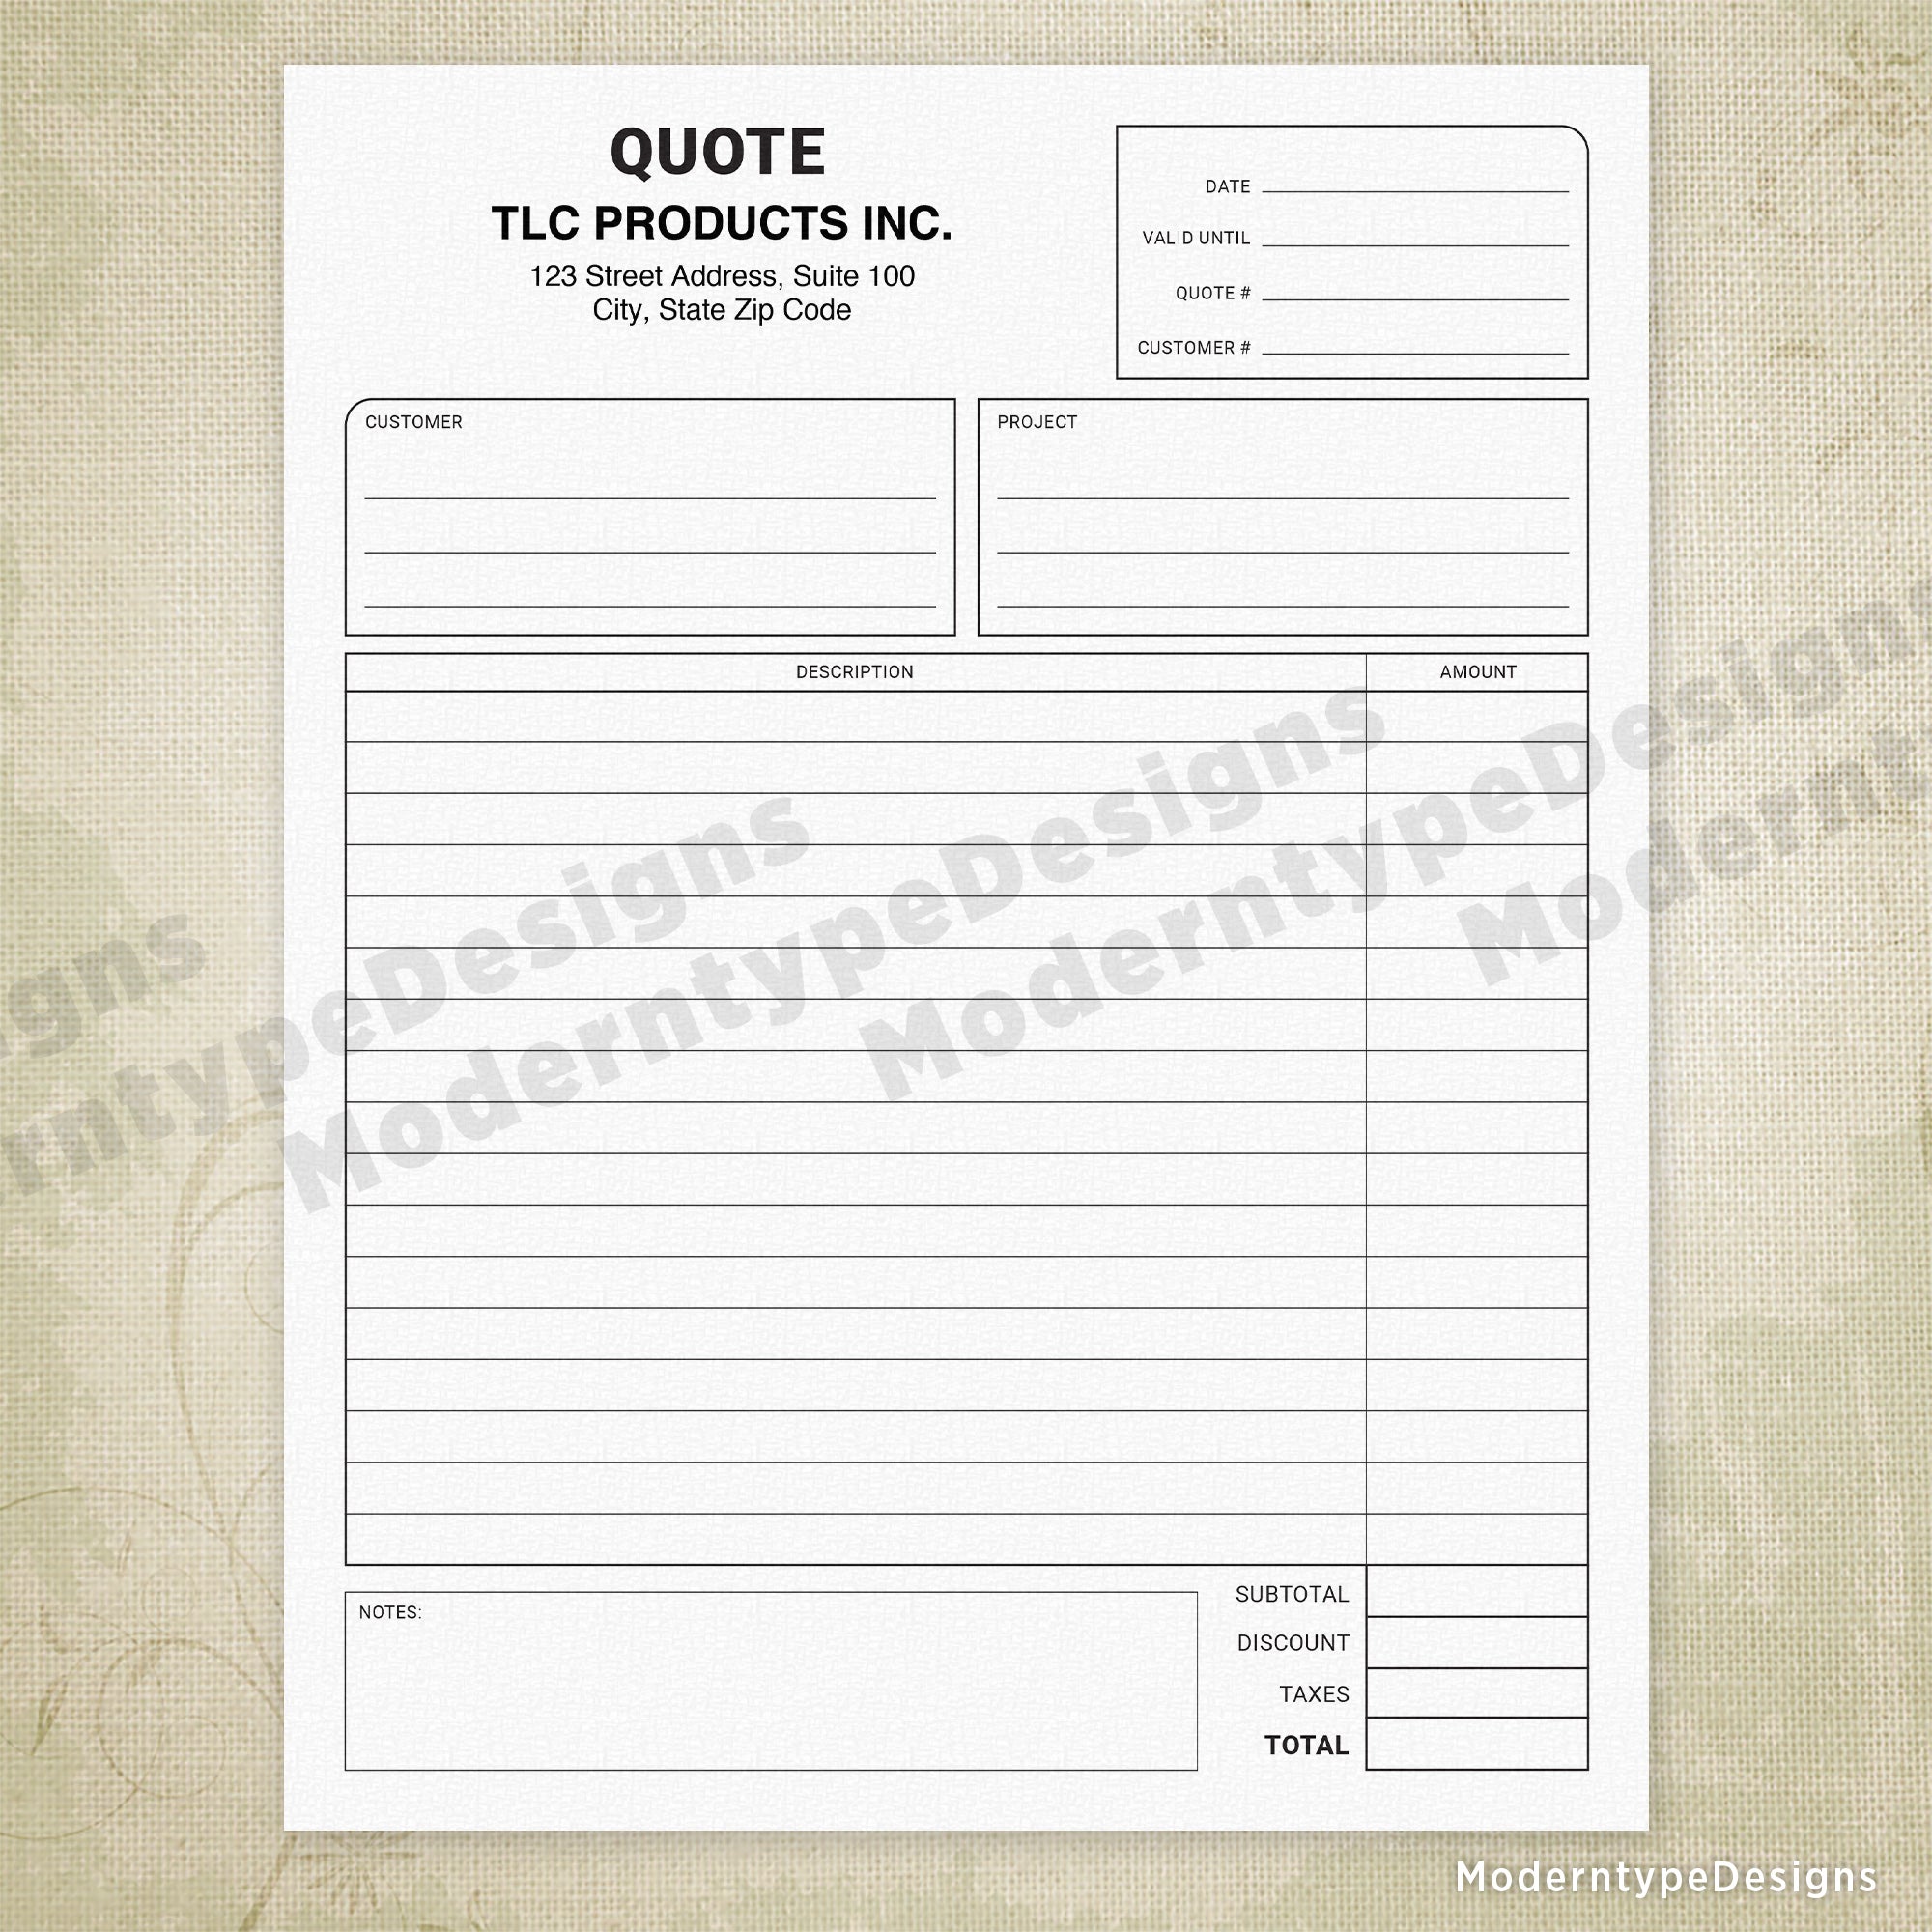 Price Quote Printable Form with Lines, Personalized